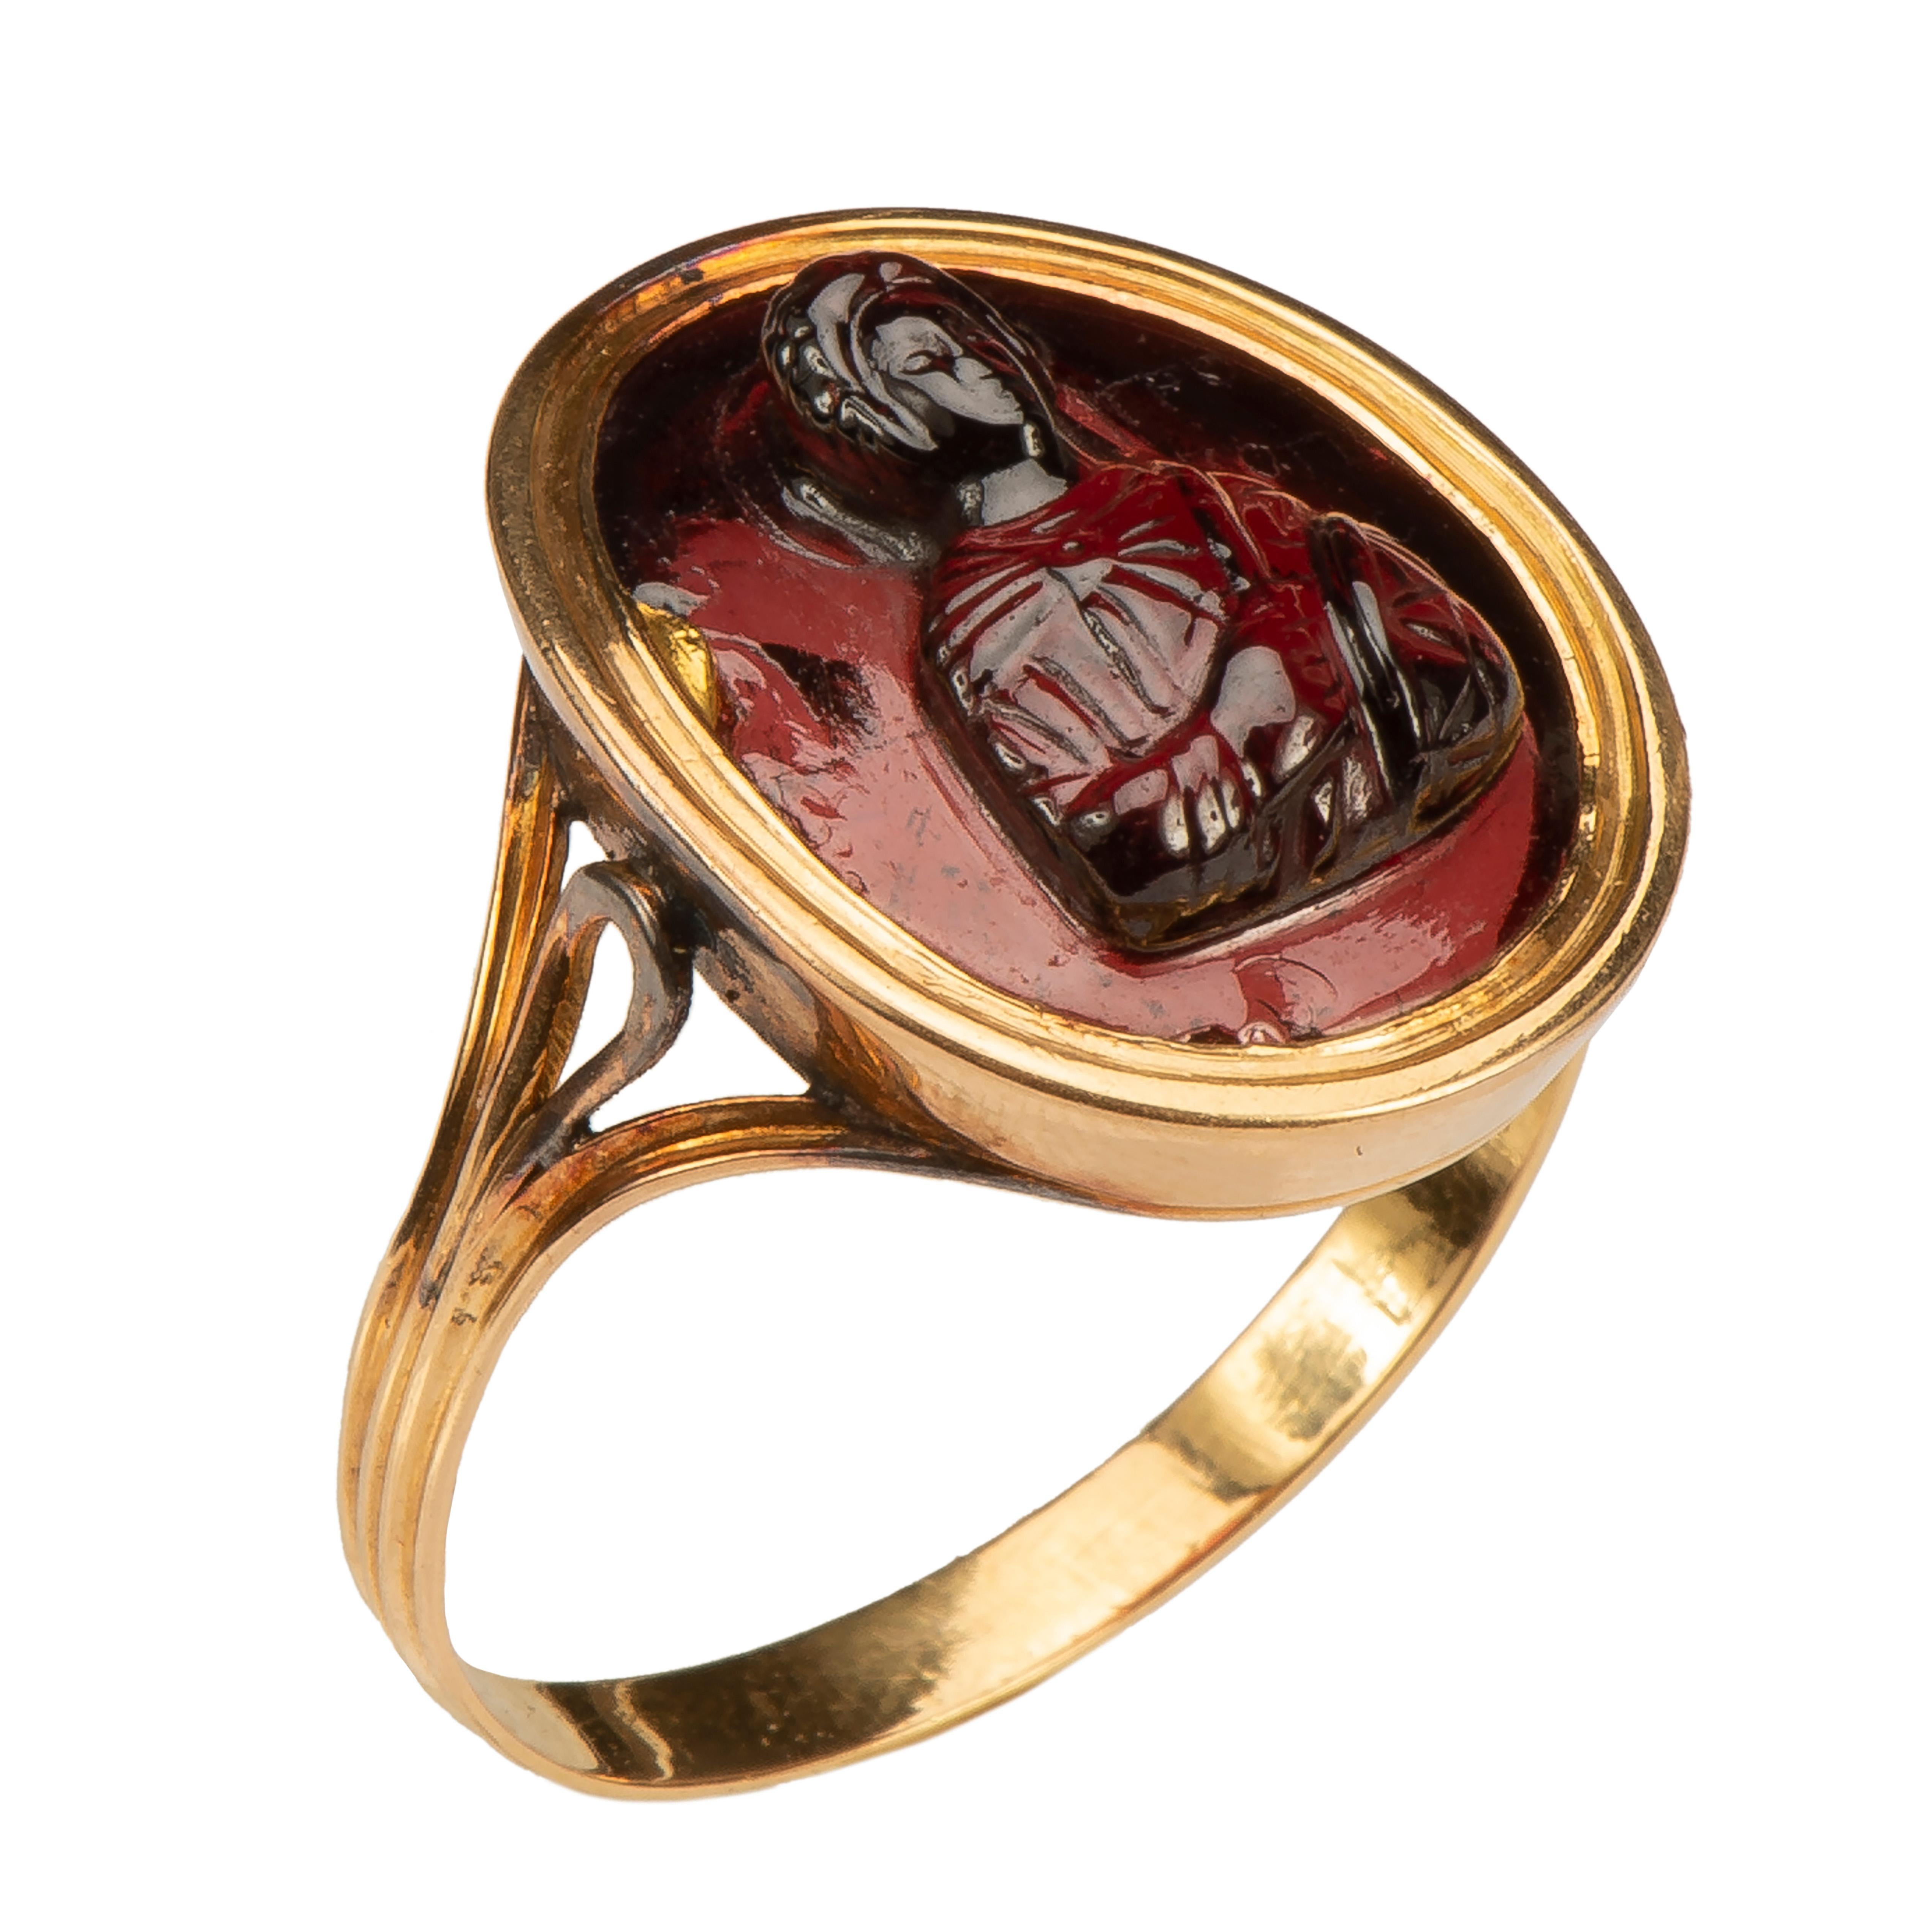 Ring with Cameo of Saint Procopius
Cameo, Middle Byzantine, c. 11th-12th century; mount, 19th century
Gold, garnet
Weight 4.4 gr; Circumference 60.98 mm.; US size 9 1/2; UK S ¾

Gold ring with plain hoop on the interior and fluted on the exterior.